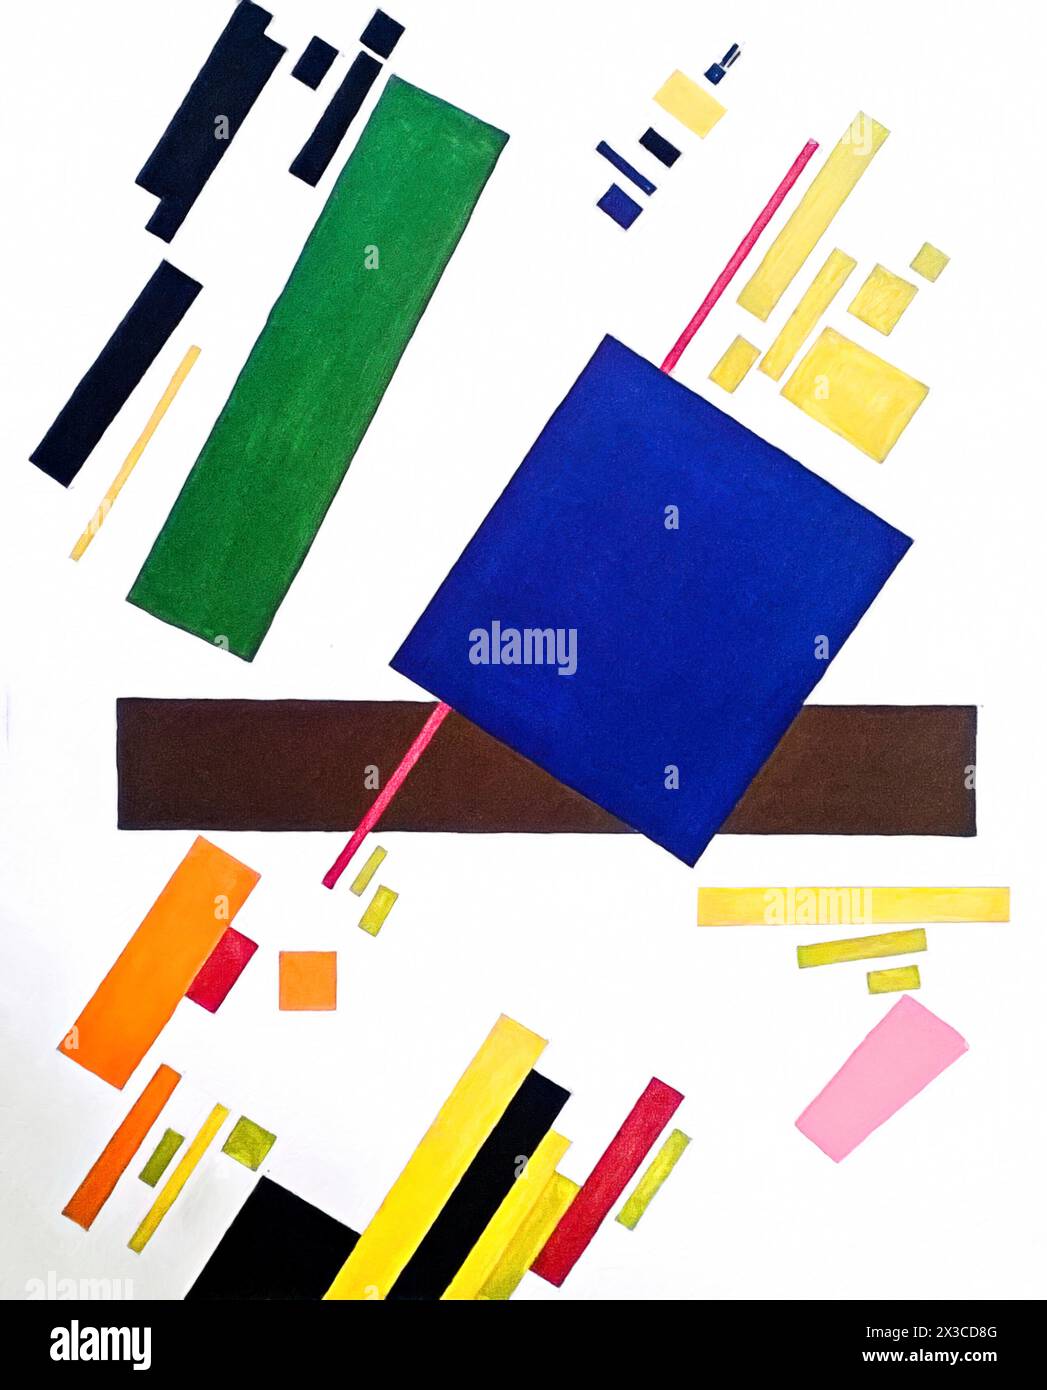 Suprematist Composition, 1916 (Painting) by Artist Malevich, Kazimir Severinovich (1878-1935) Russian. Stock Vector